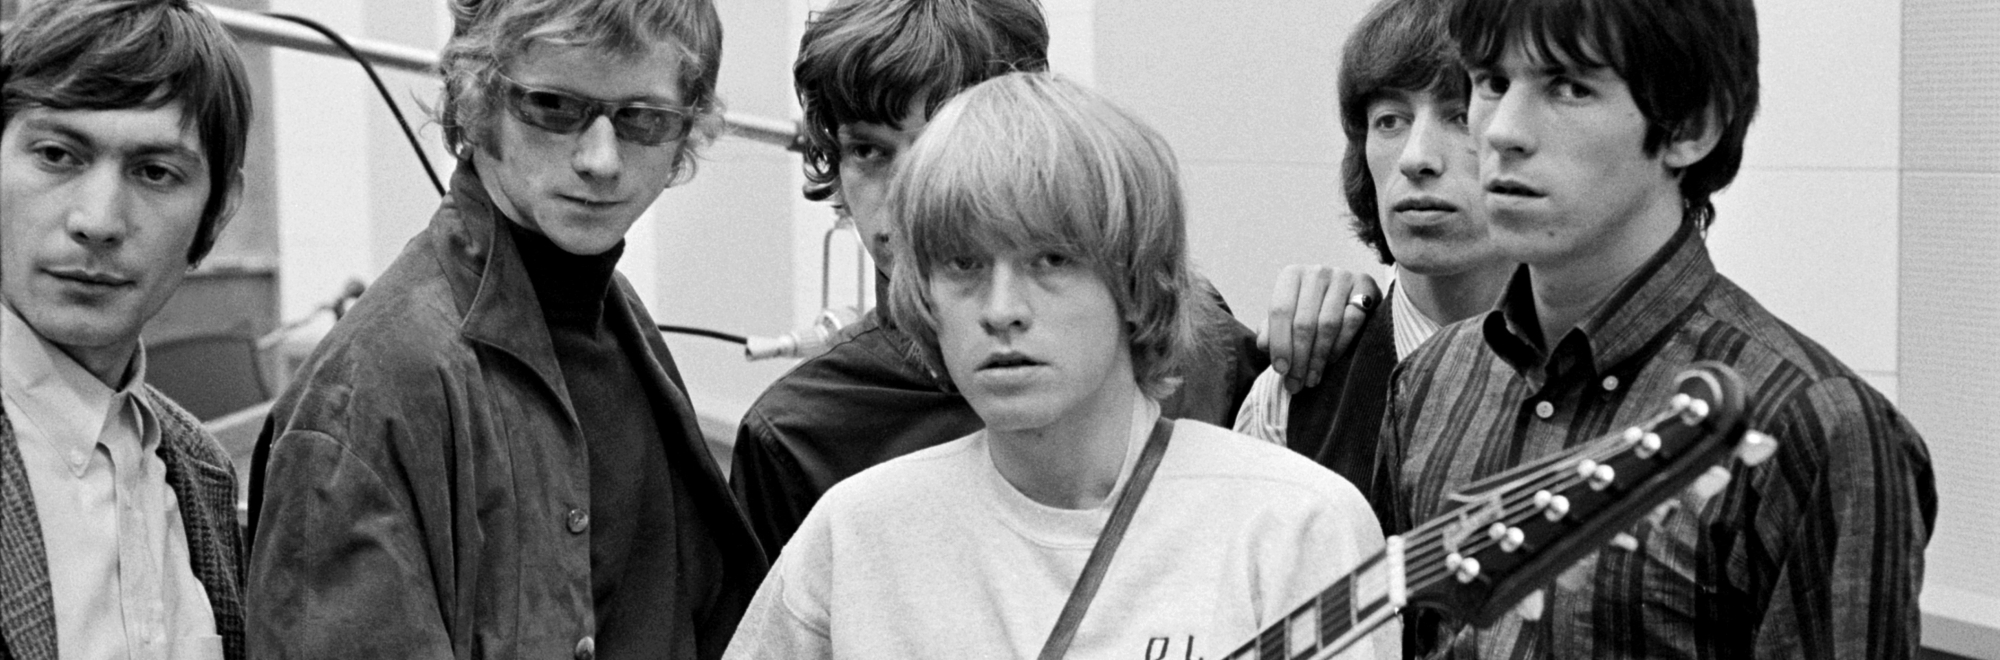 Iconic Rolling Stones' producer Andrew Loog Oldham talks about creativity, drugs and rock’n’roll with Mark Perkins